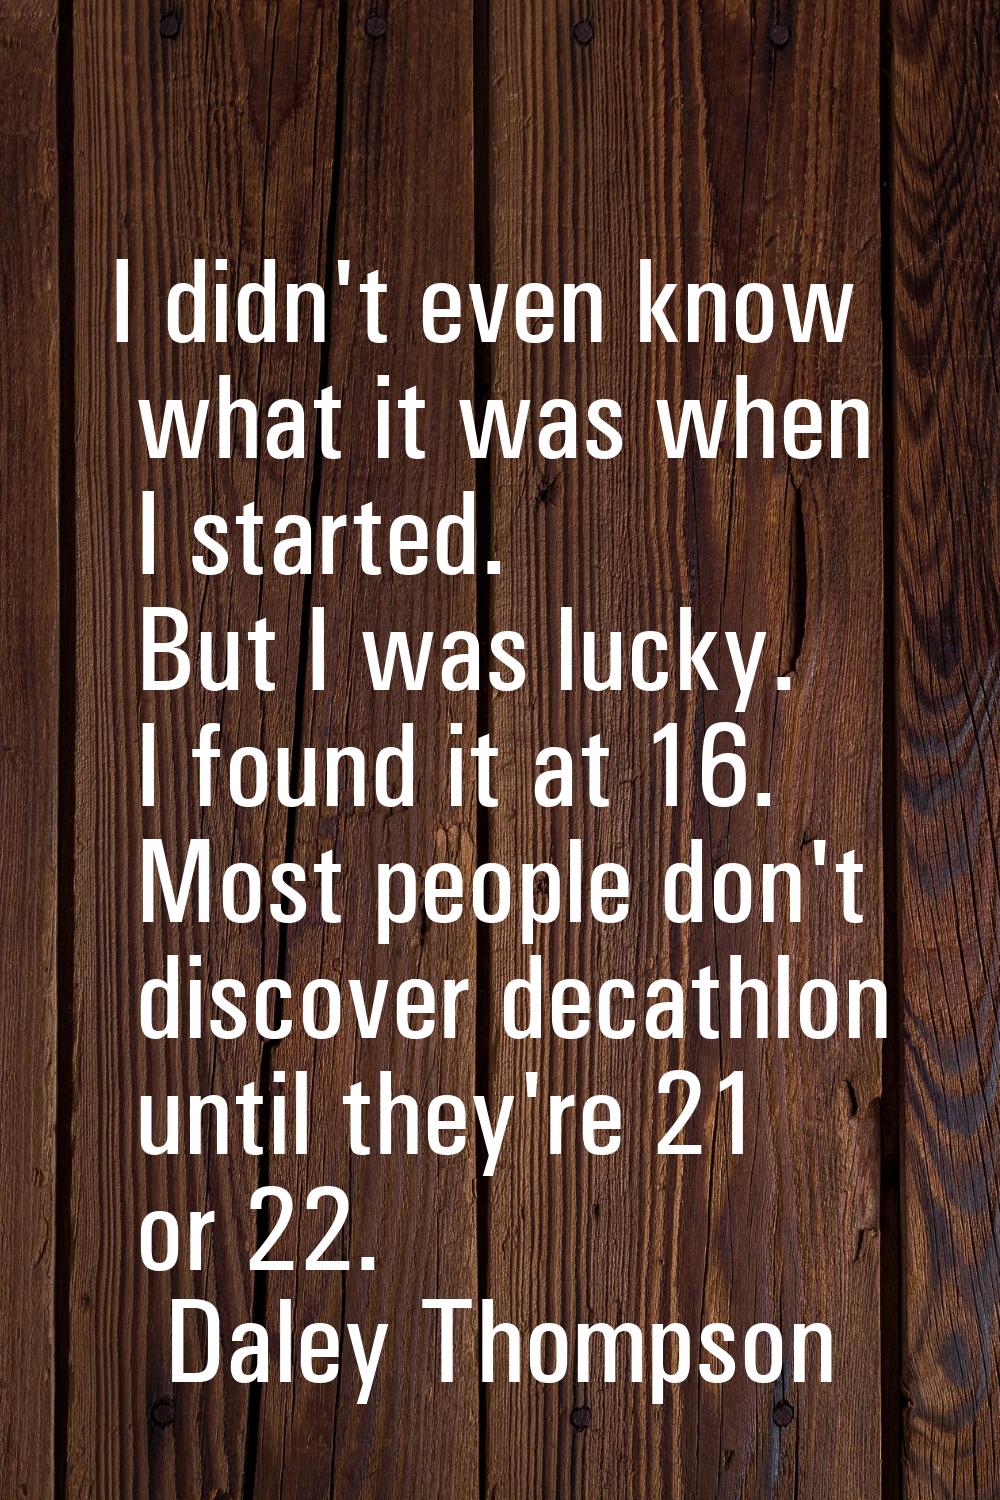 I didn't even know what it was when I started. But I was lucky. I found it at 16. Most people don't